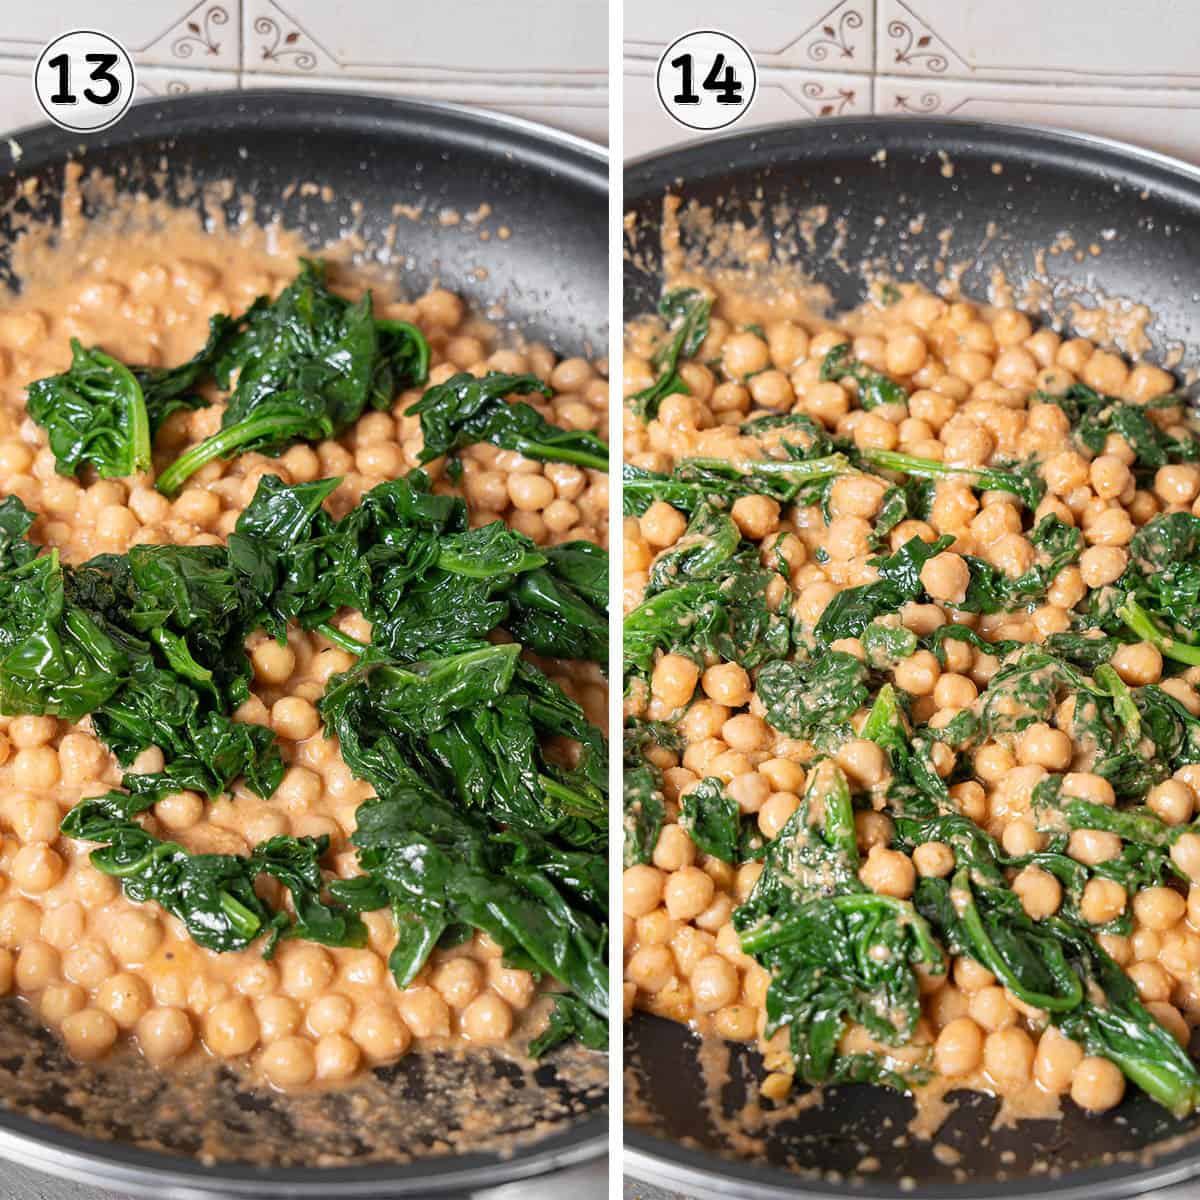 stirring the cooked spinach into the pan of garbanzos.